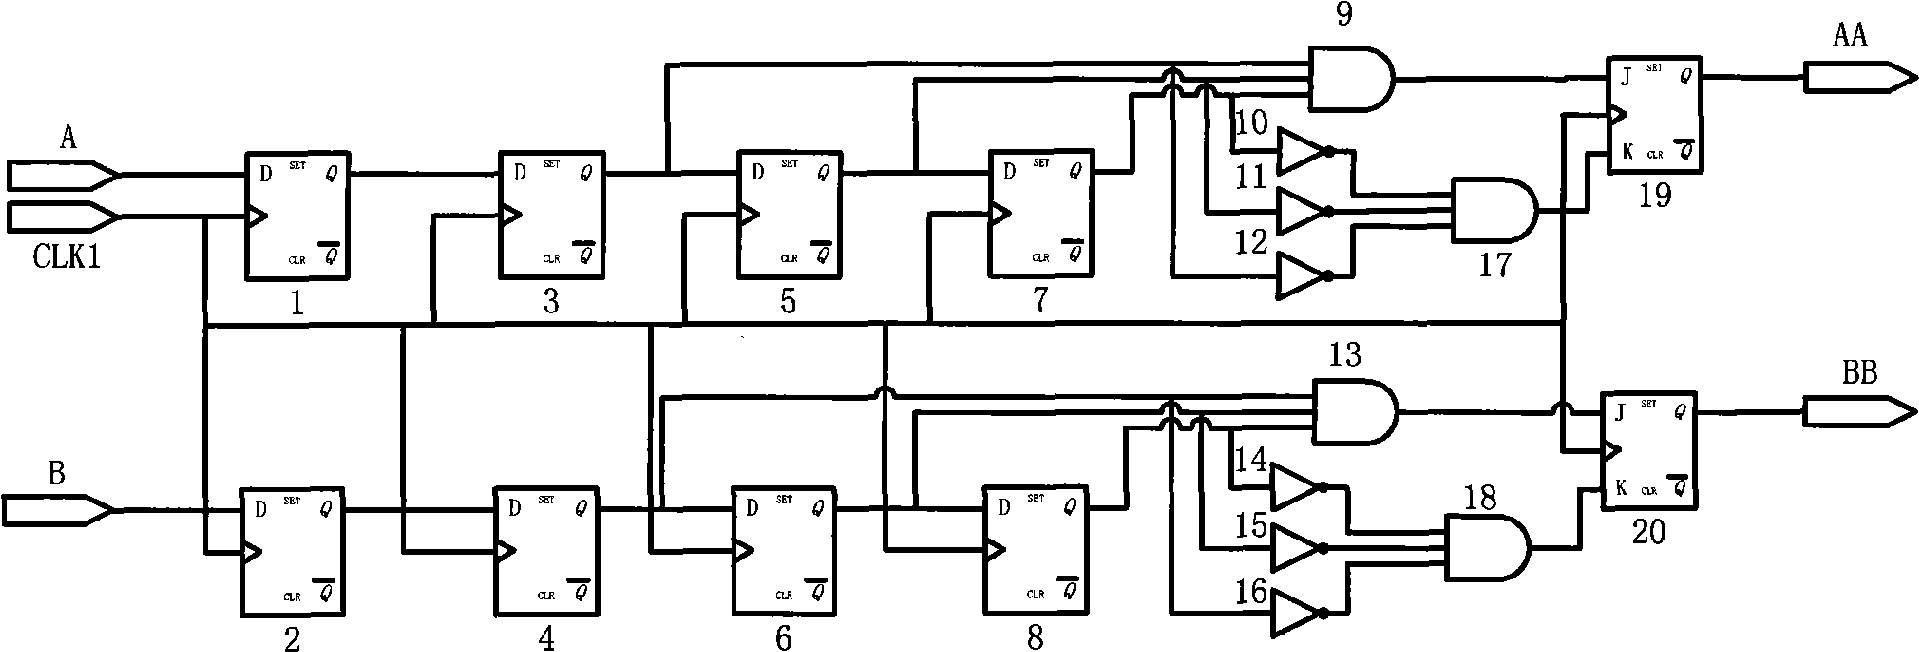 Orthogonal signal frequency-multiplication phase-demodulation logic circuit with filter function